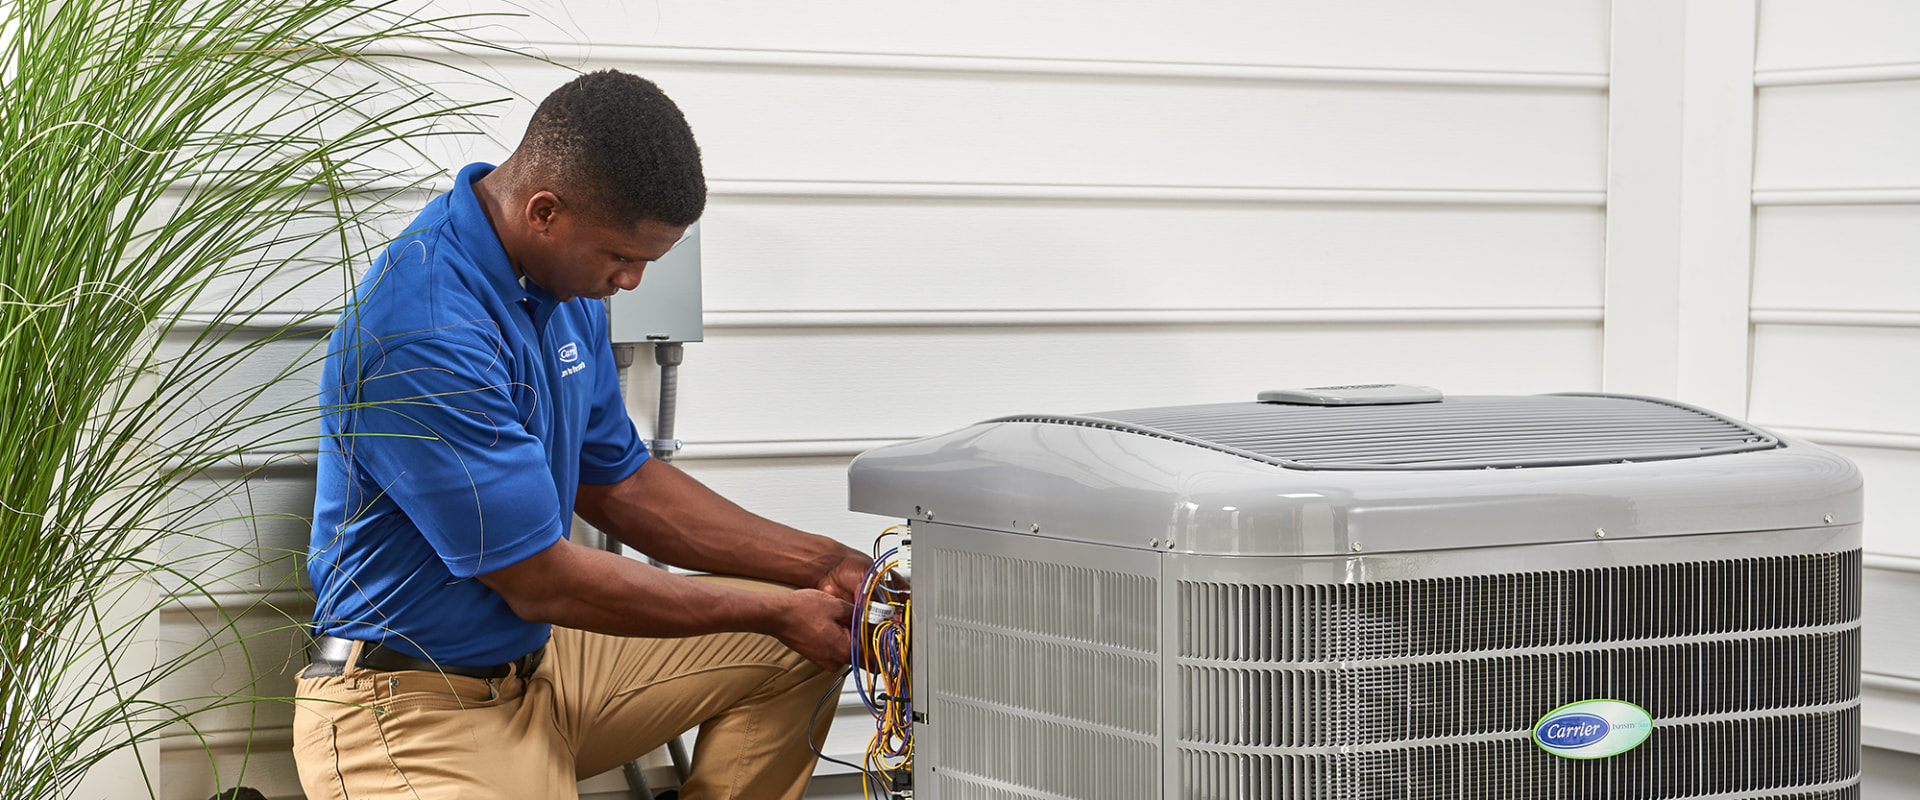 The Ultimate Guide to Extending the Lifespan of Your Air Conditioning Unit